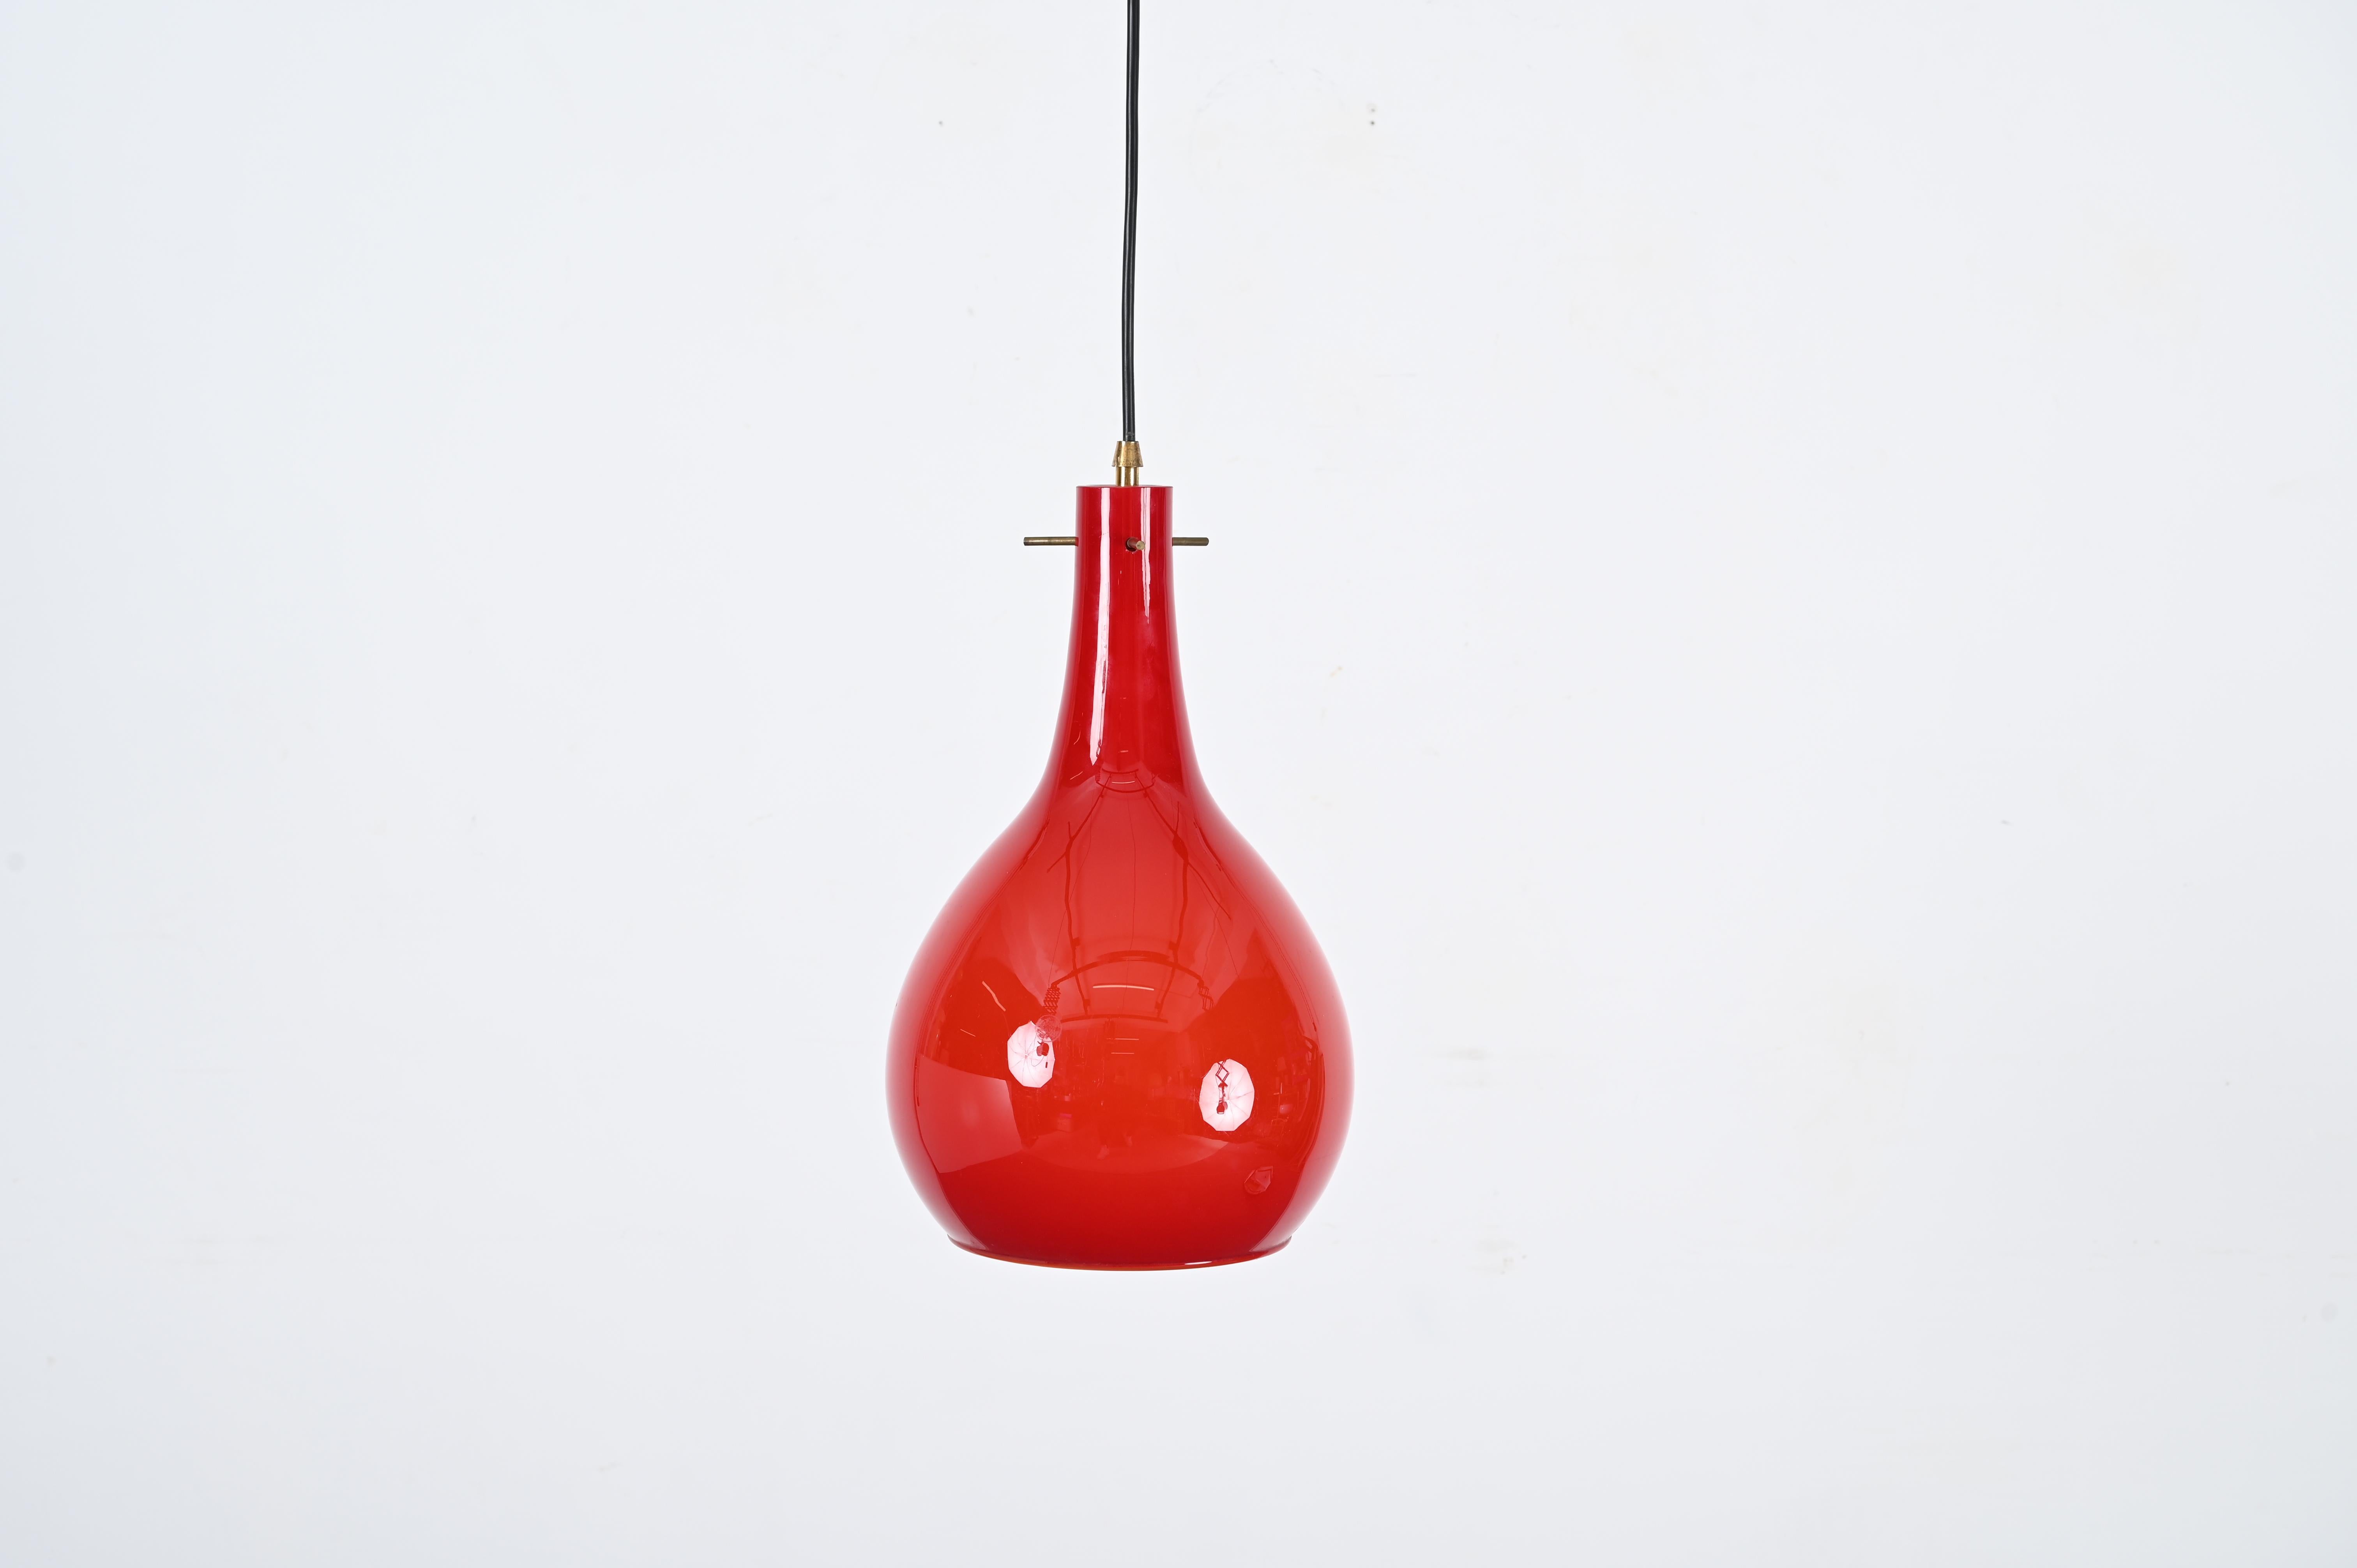 Stunning Italian Murano pendant with a marvellous cased red glass lampshade. This lovely object was designed by Stilnovo in Italy during the 1950s. 

The pendant is fully original, in perfect conditions with no chips or scratches. It features a